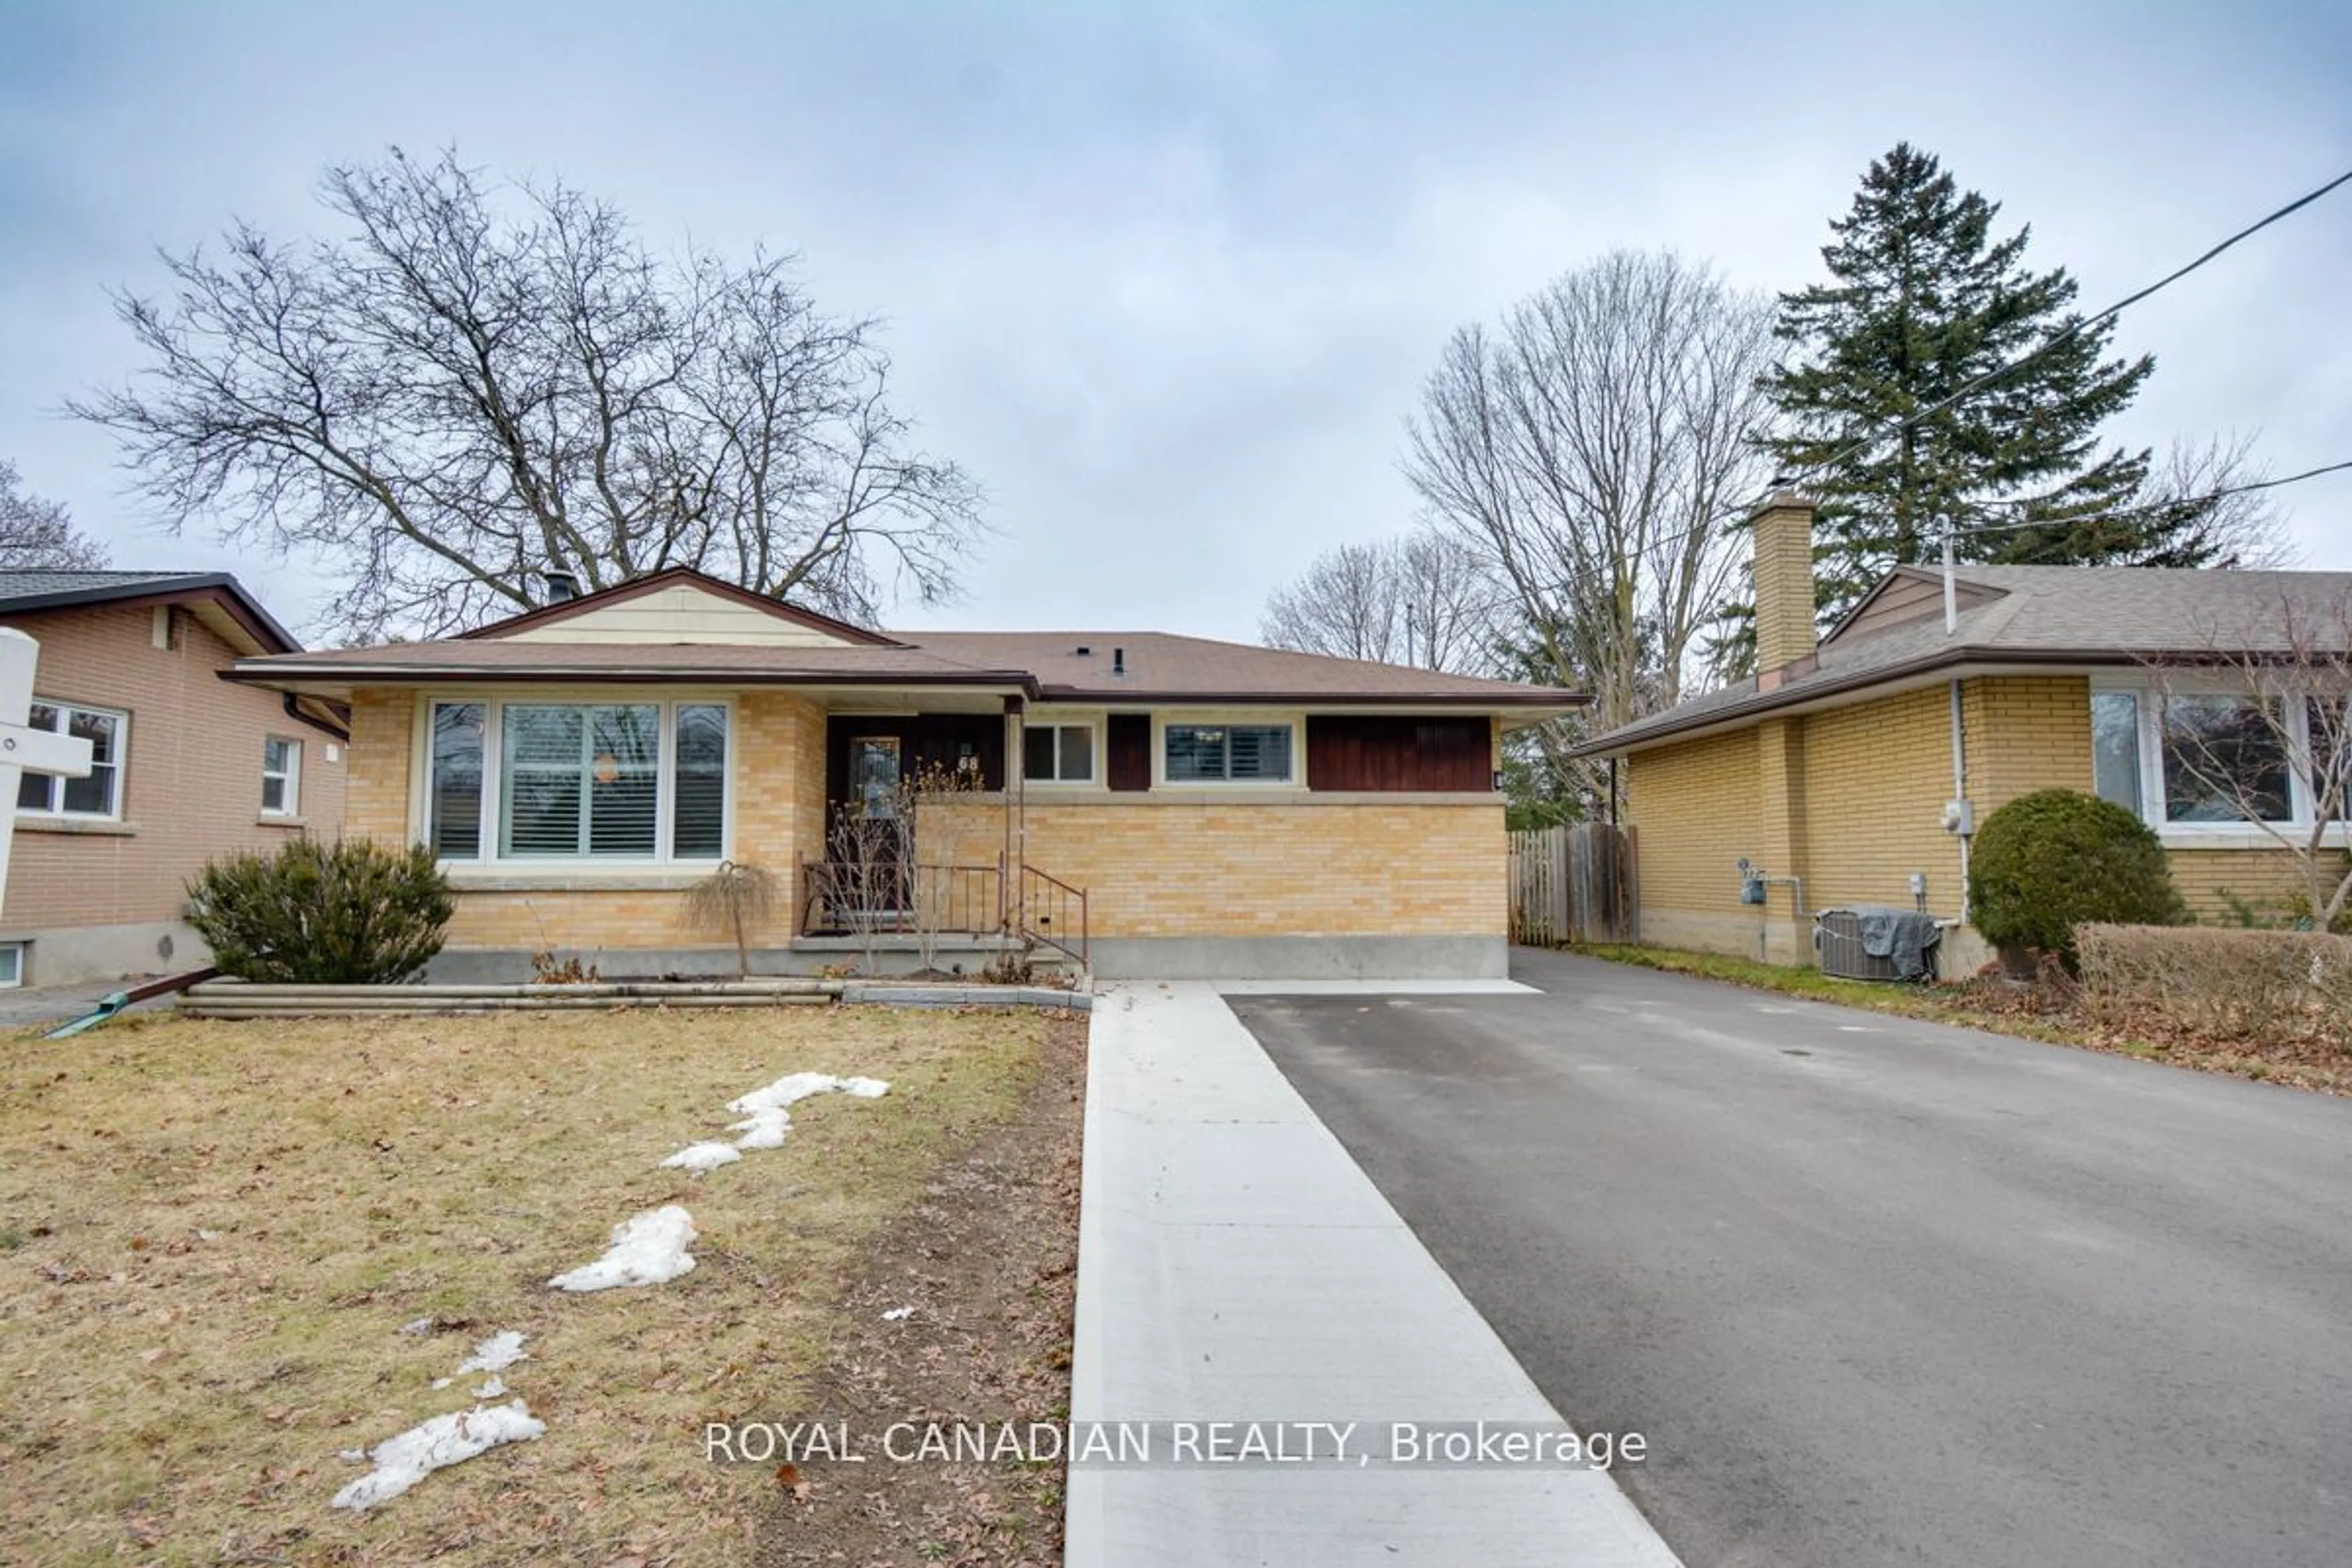 Frontside or backside of a home for 68 Maywood Rd, Kitchener Ontario N2C 2A4